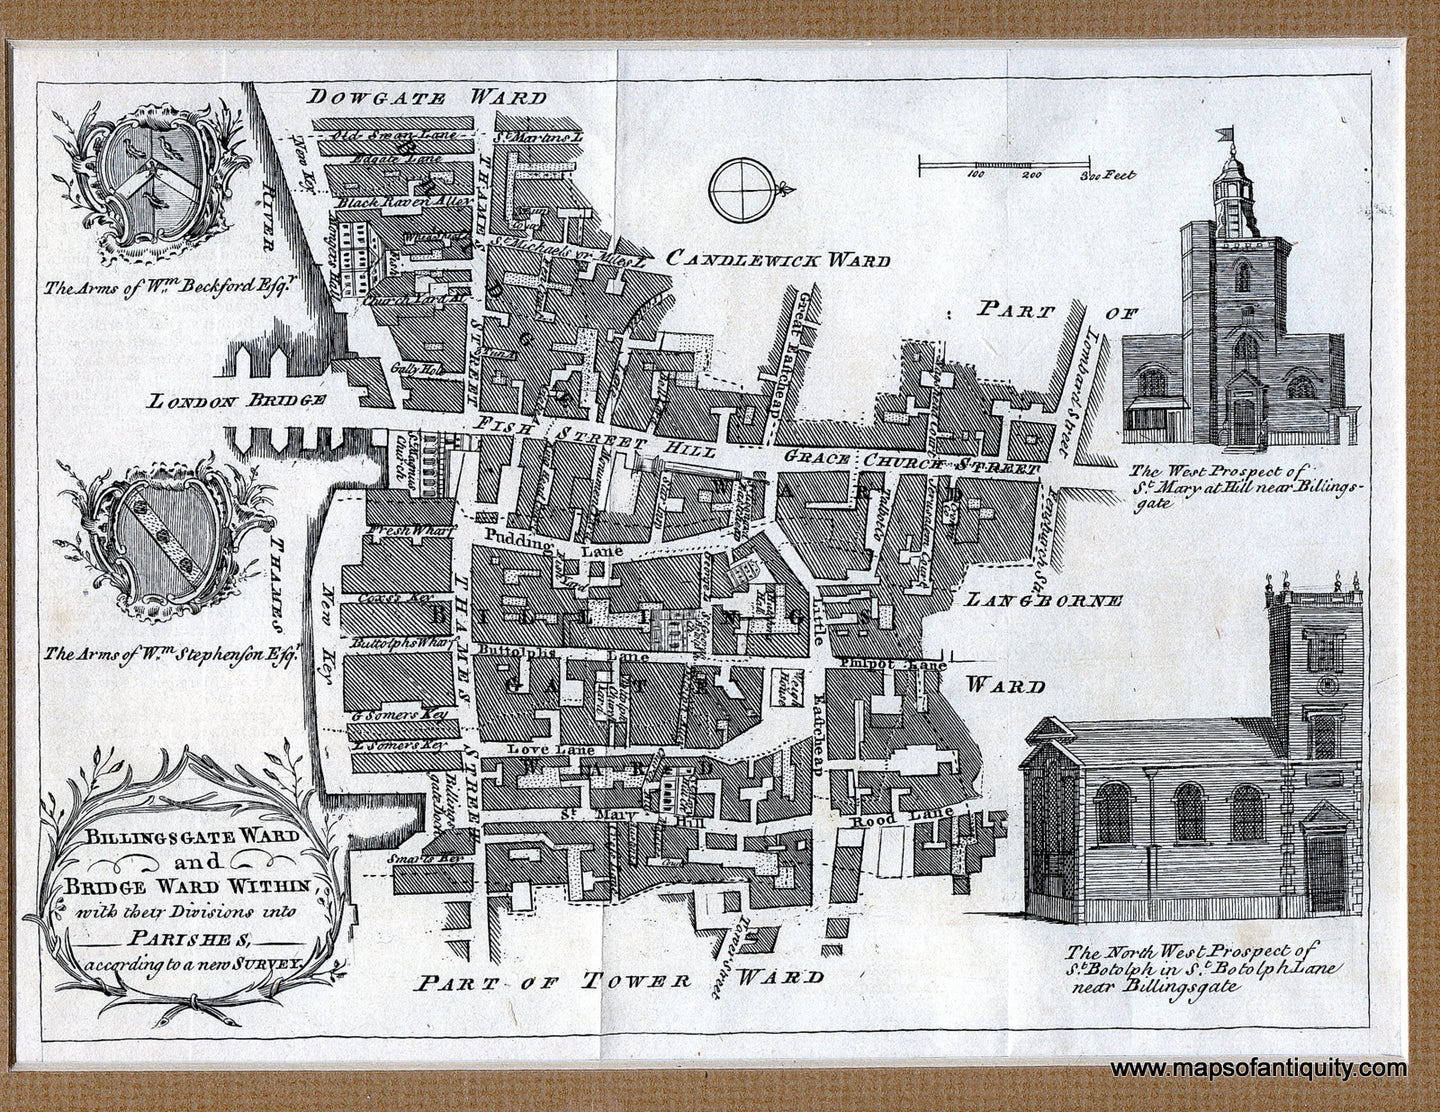 Black-and-White-Engraved-Antique-City-Plan-Billingsgate-Ward-and-Bridge-Ward-Within-with-their-Divisions-into-Parishes-according-to-a-new-Survey.**********-Towns-and-Cities-United-Kingdom-1770-London-Magazine-Maps-Of-Antiquity